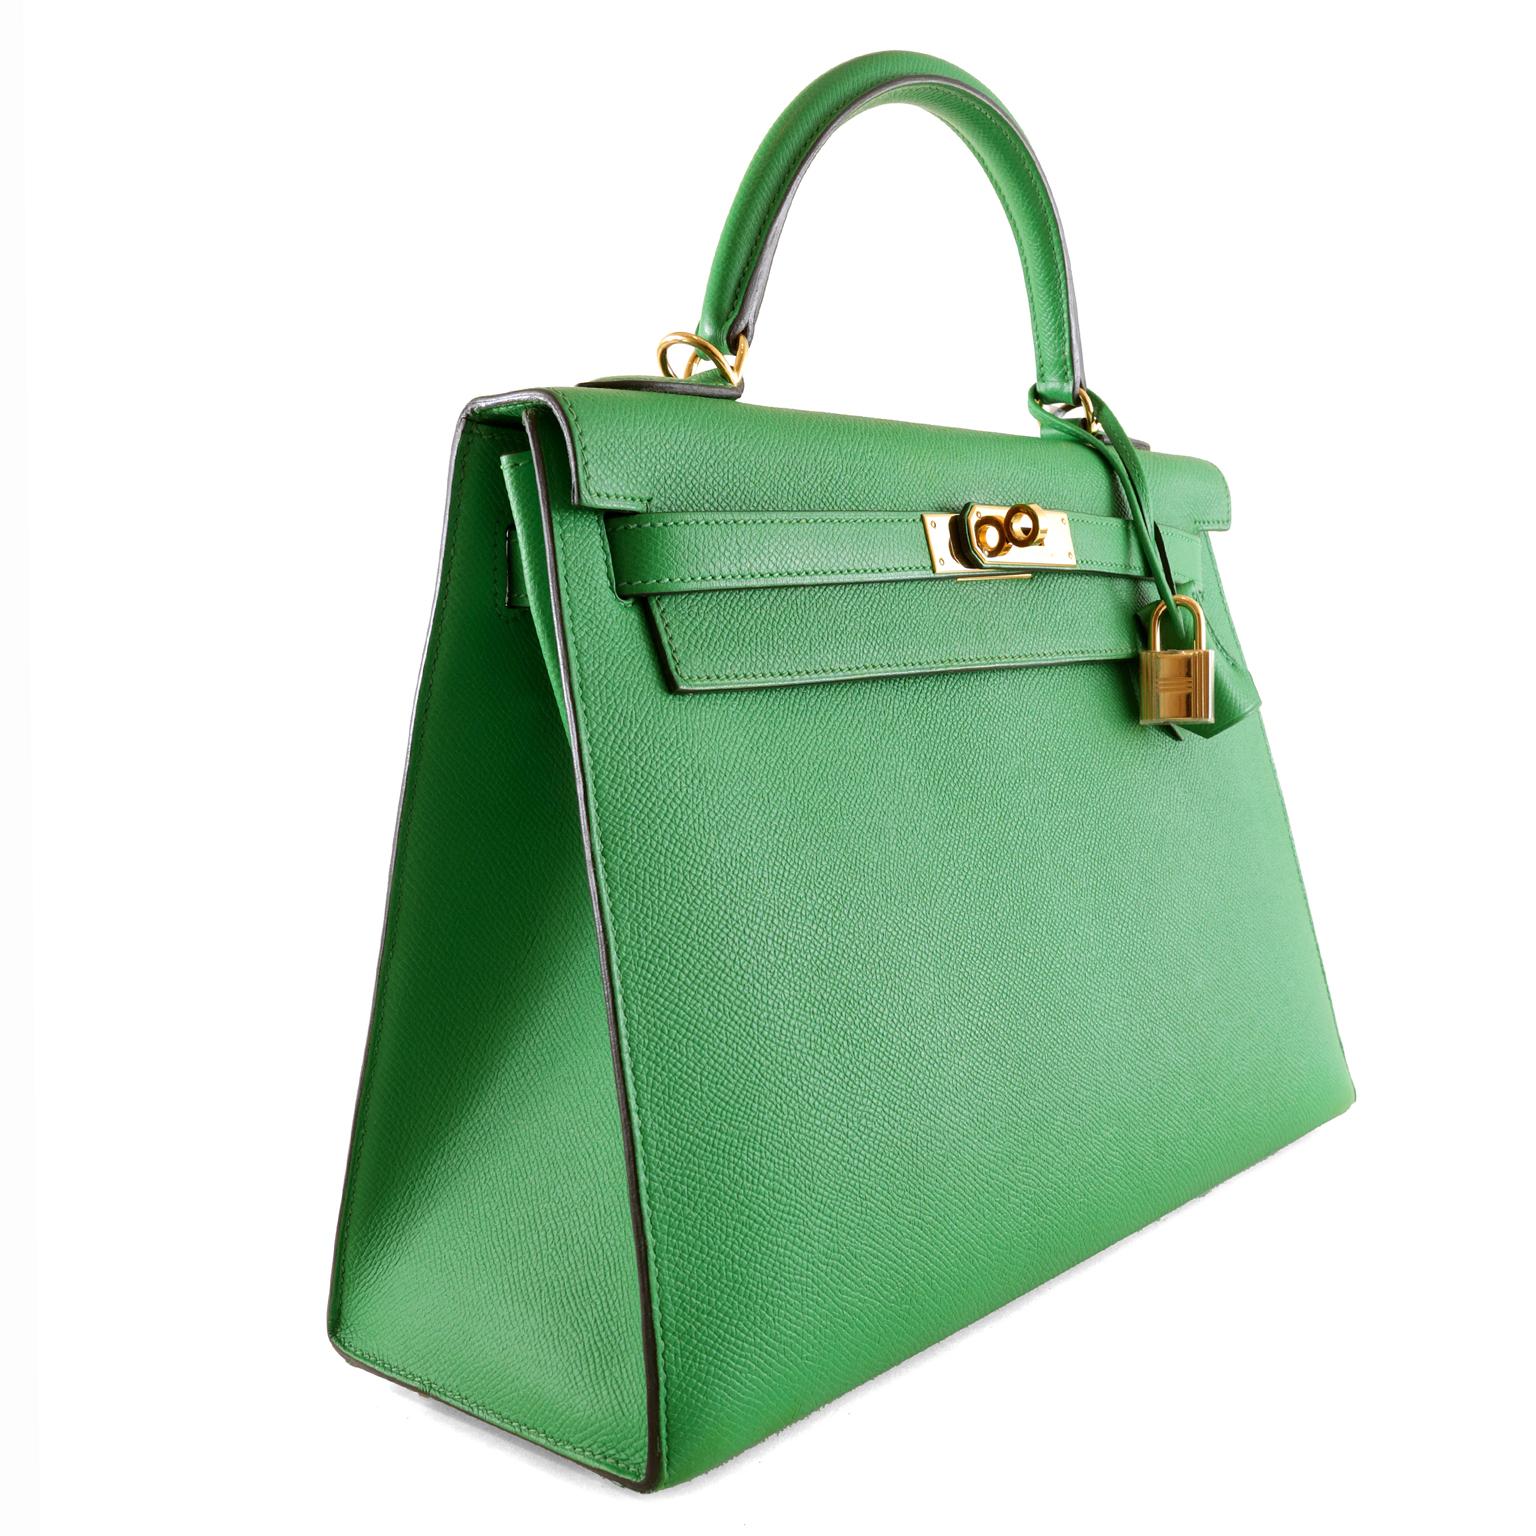 Hermès Bambou Epsom 32cm Kelly- pristine condition; appears never carried. 
Hermès bags are considered the ultimate luxury item.  Each piece is handcrafted with waitlists that can exceed a year or more.  The ladylike Kelly is classic and refined, a